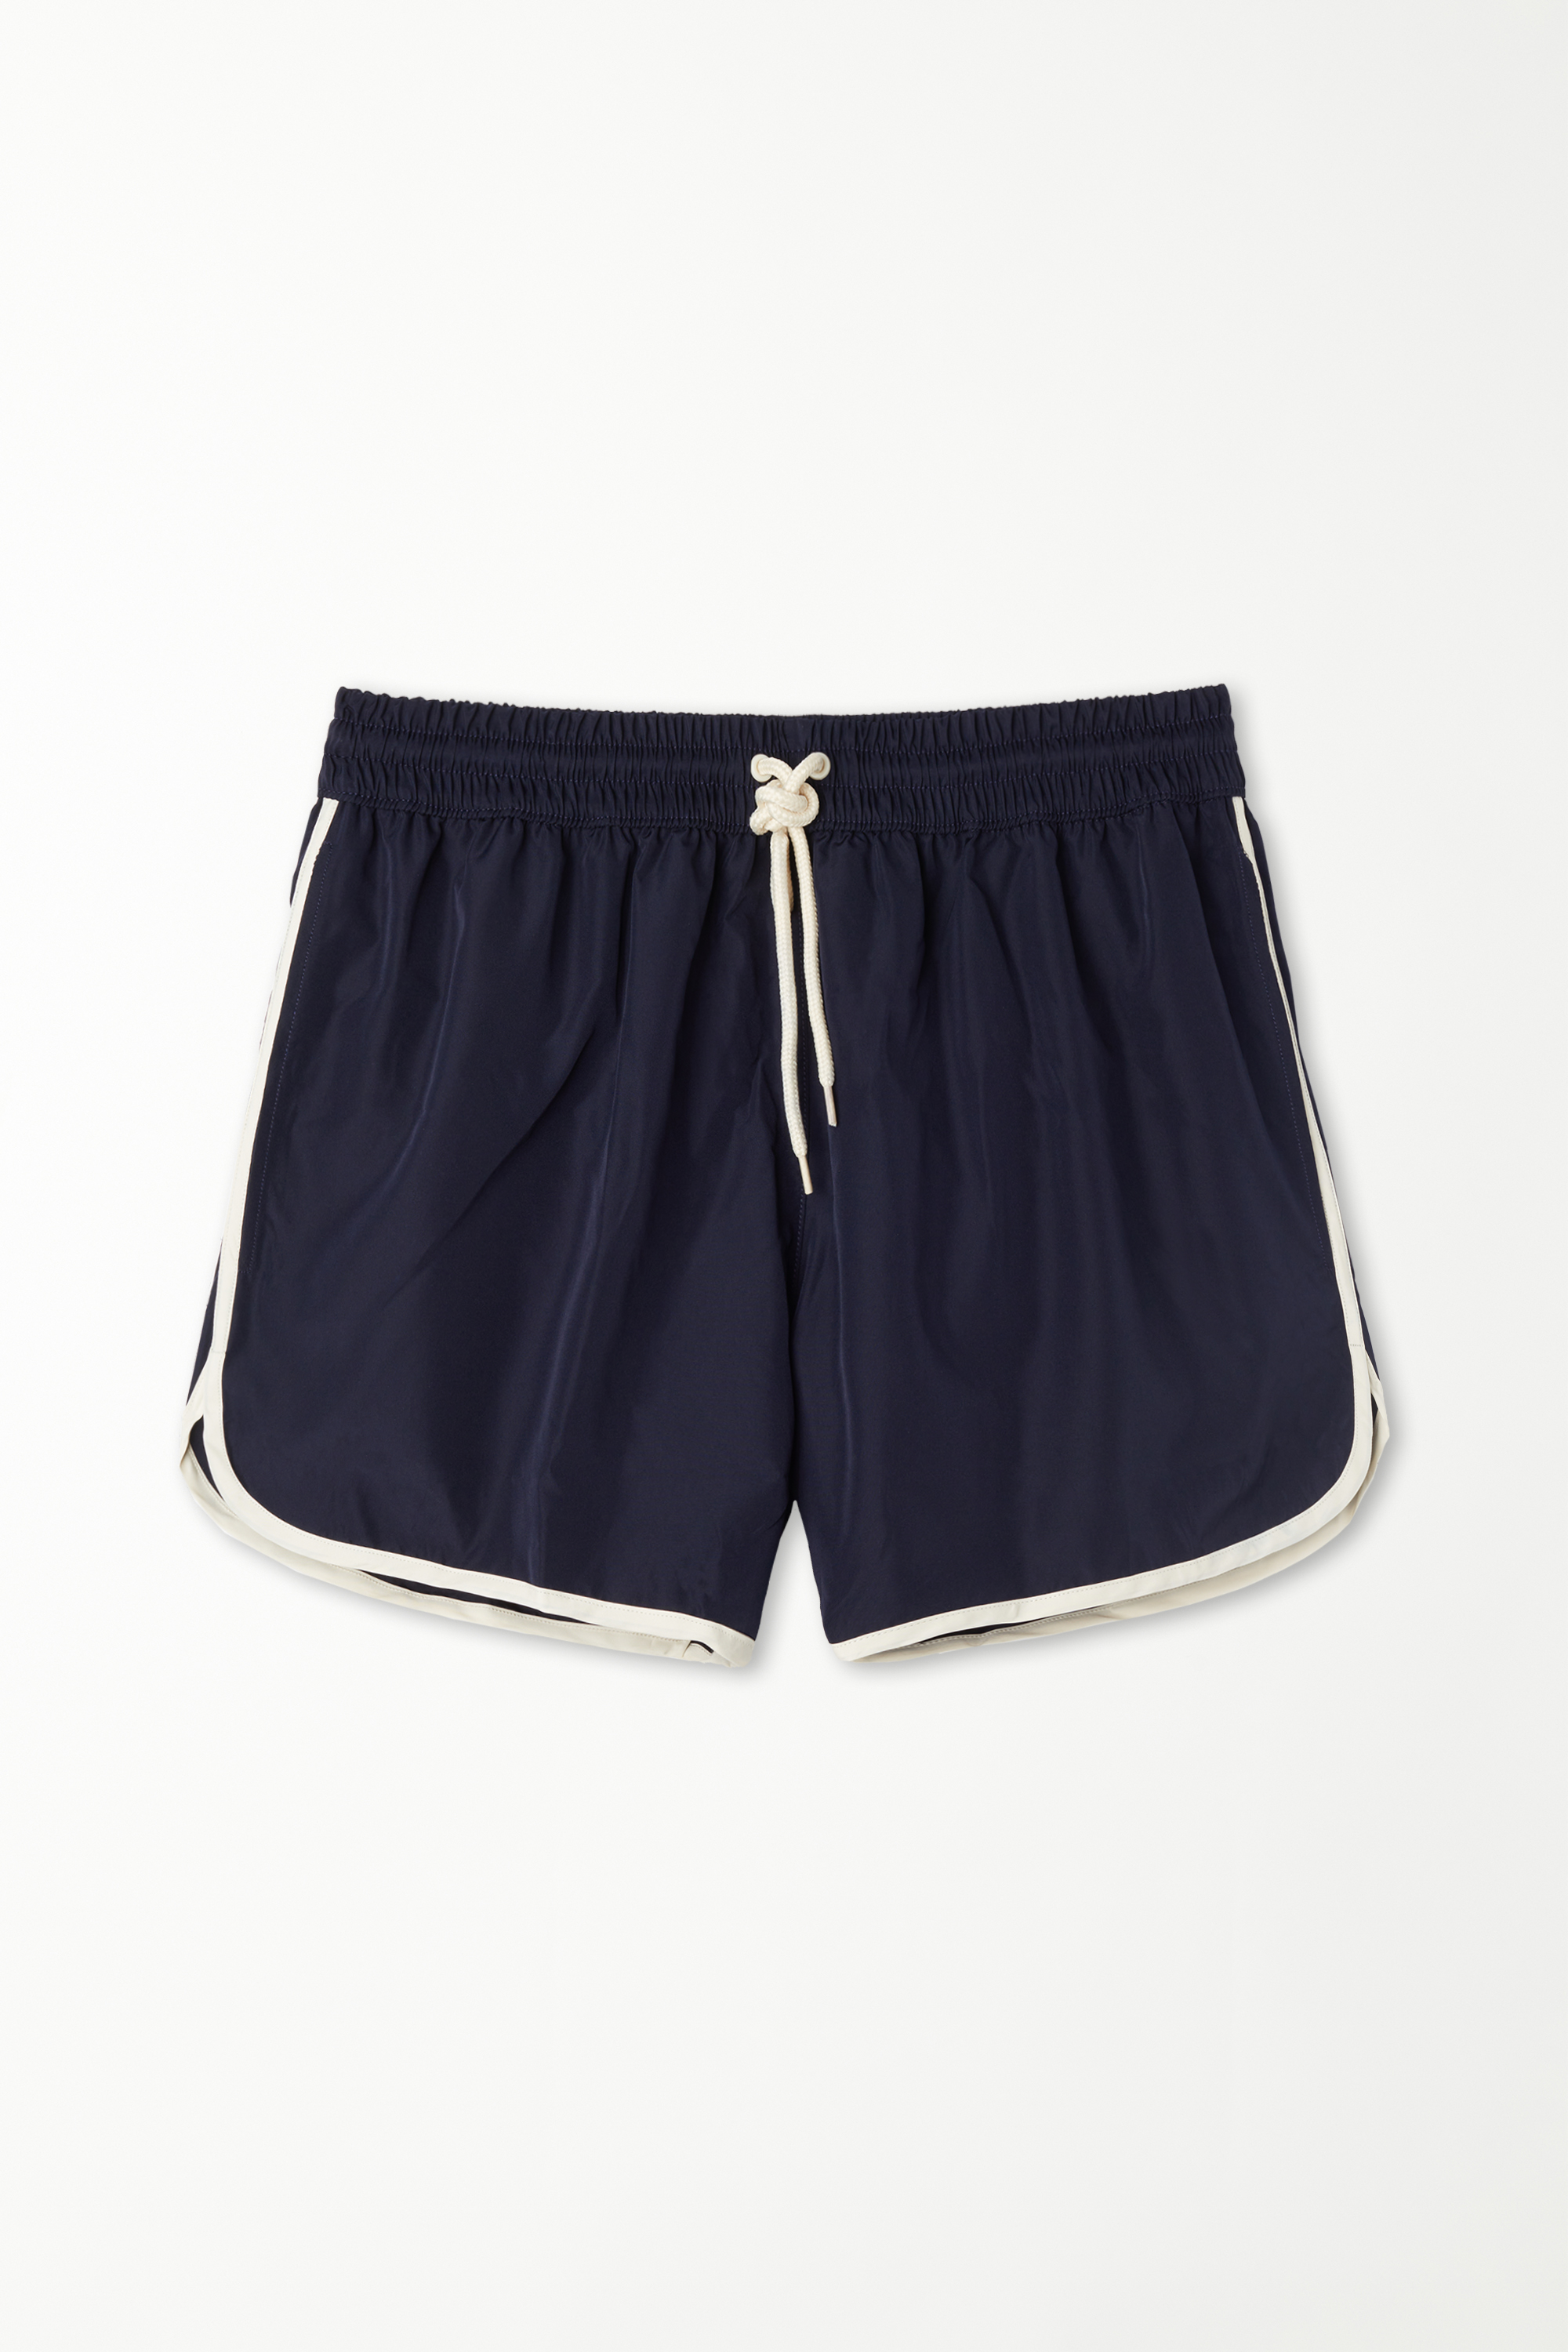 Short Recycled Fabric Swim Trunks with Piping